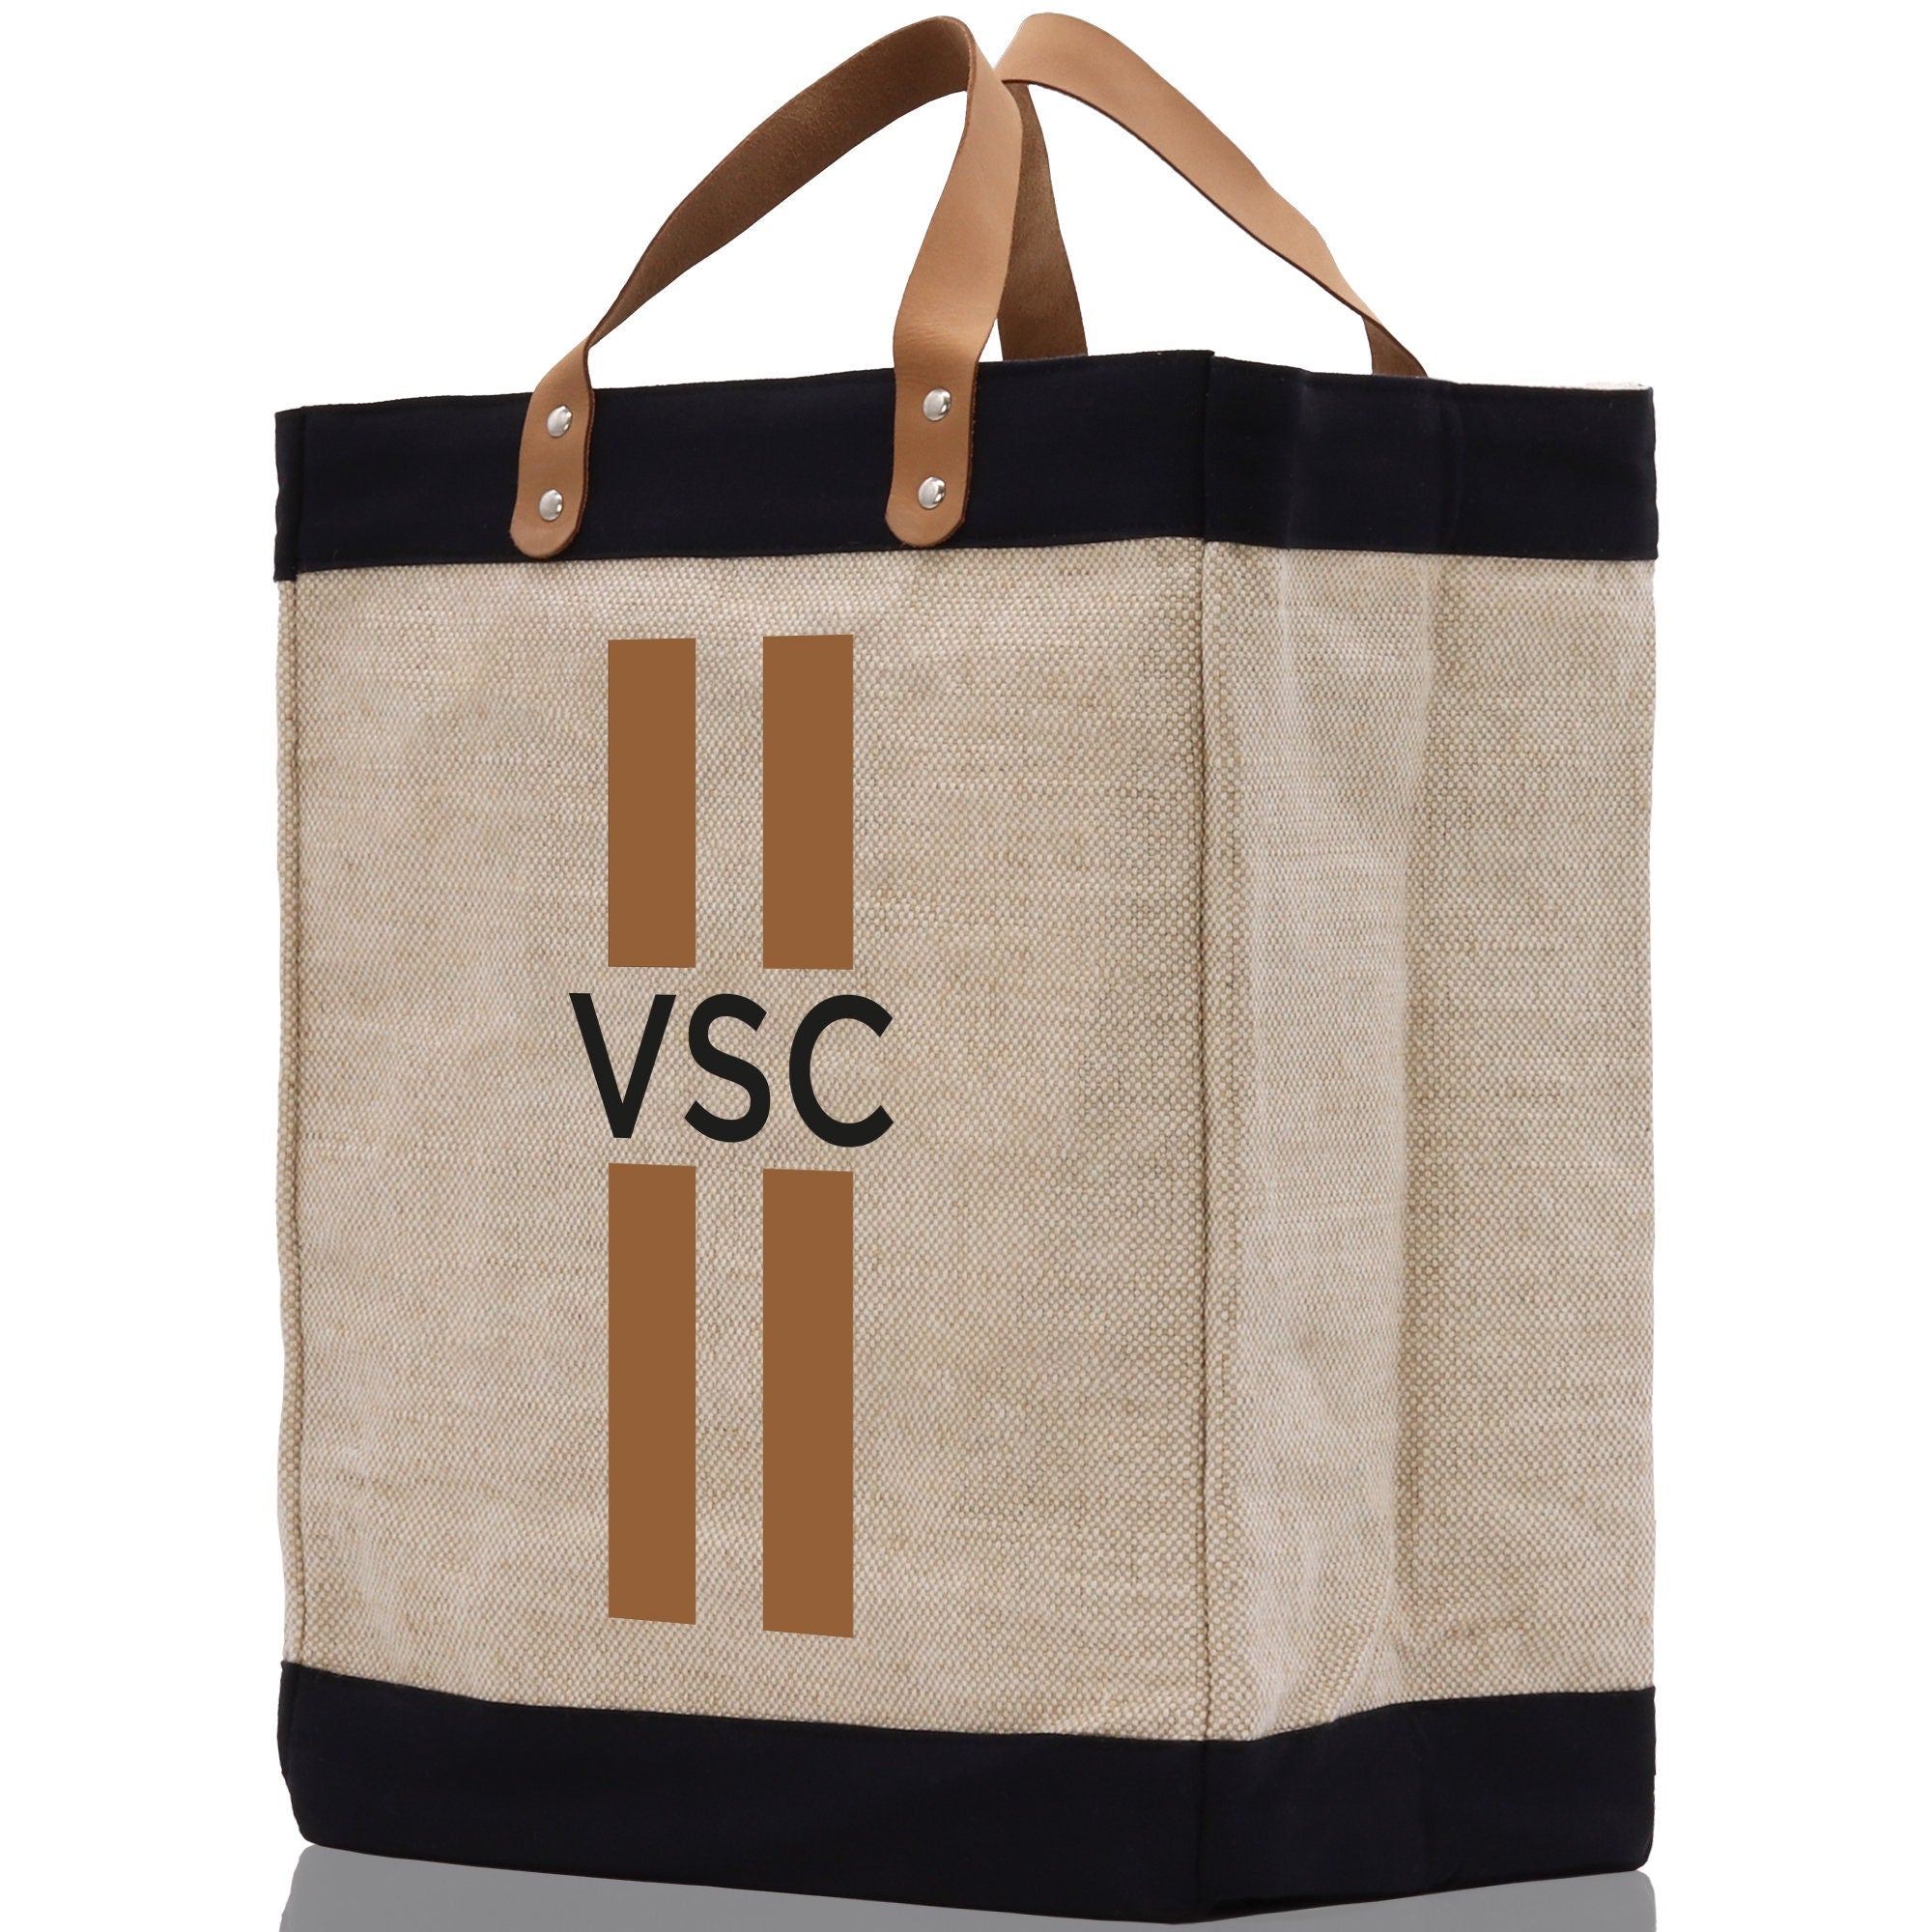 a canvas tote bag with a logo on it